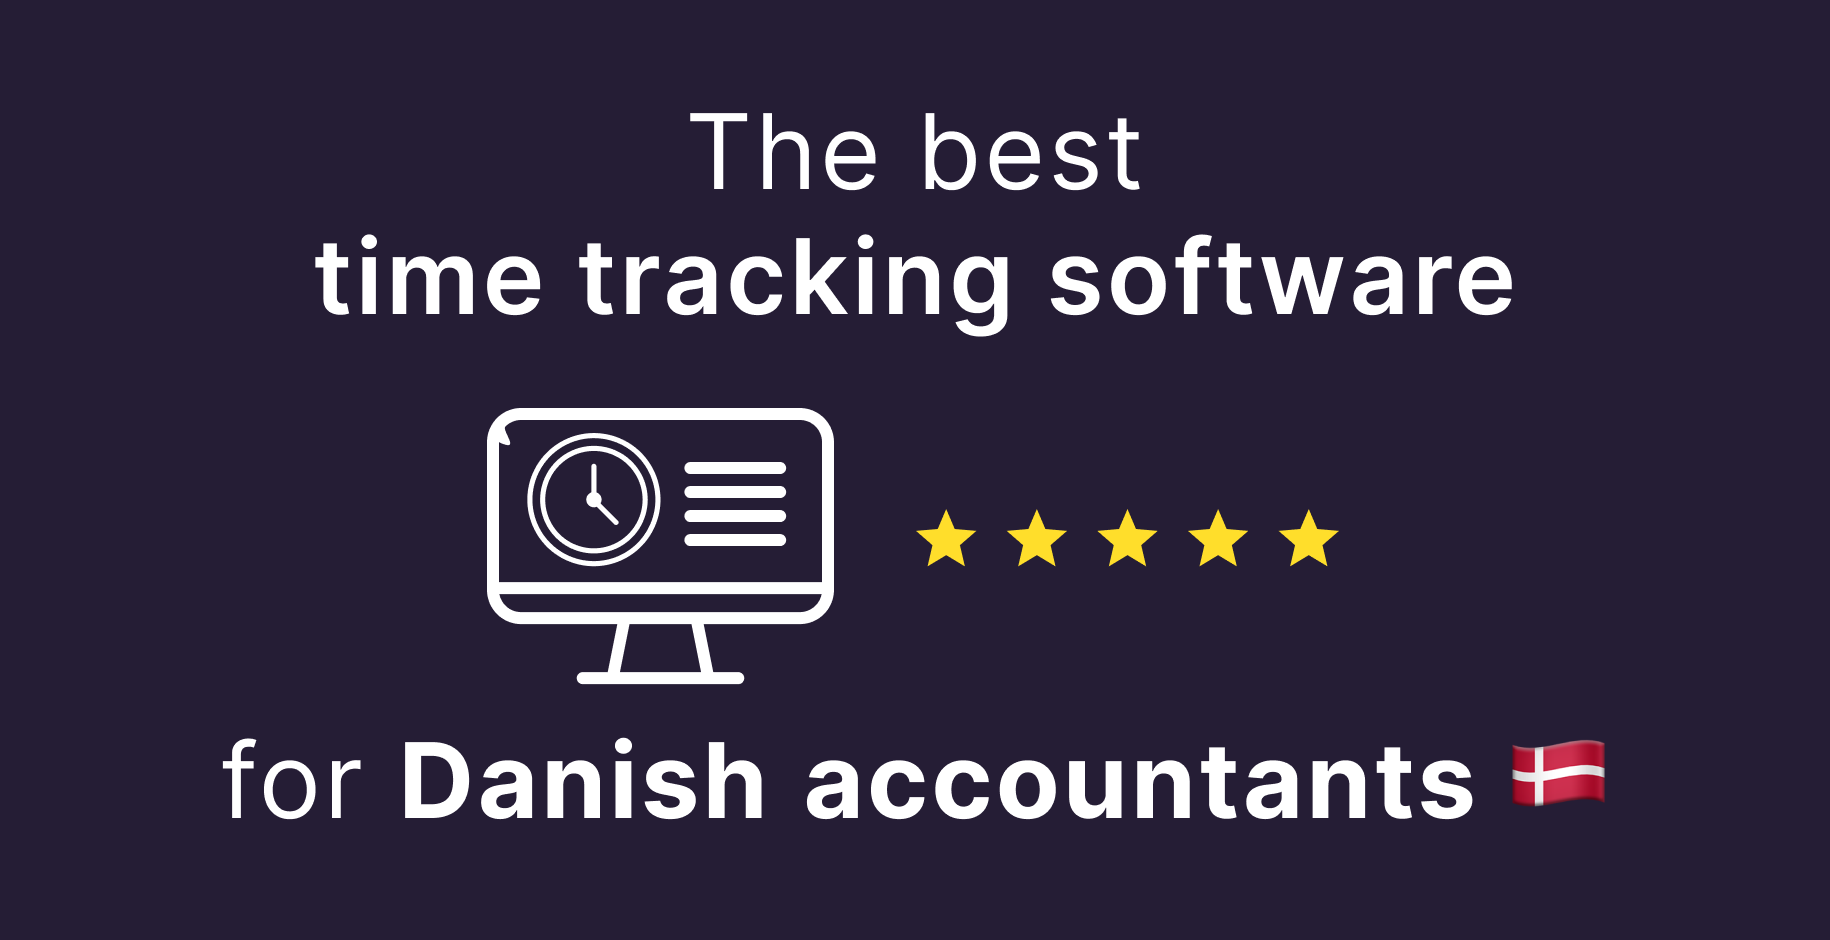 The best time tracking software for Danish accountants